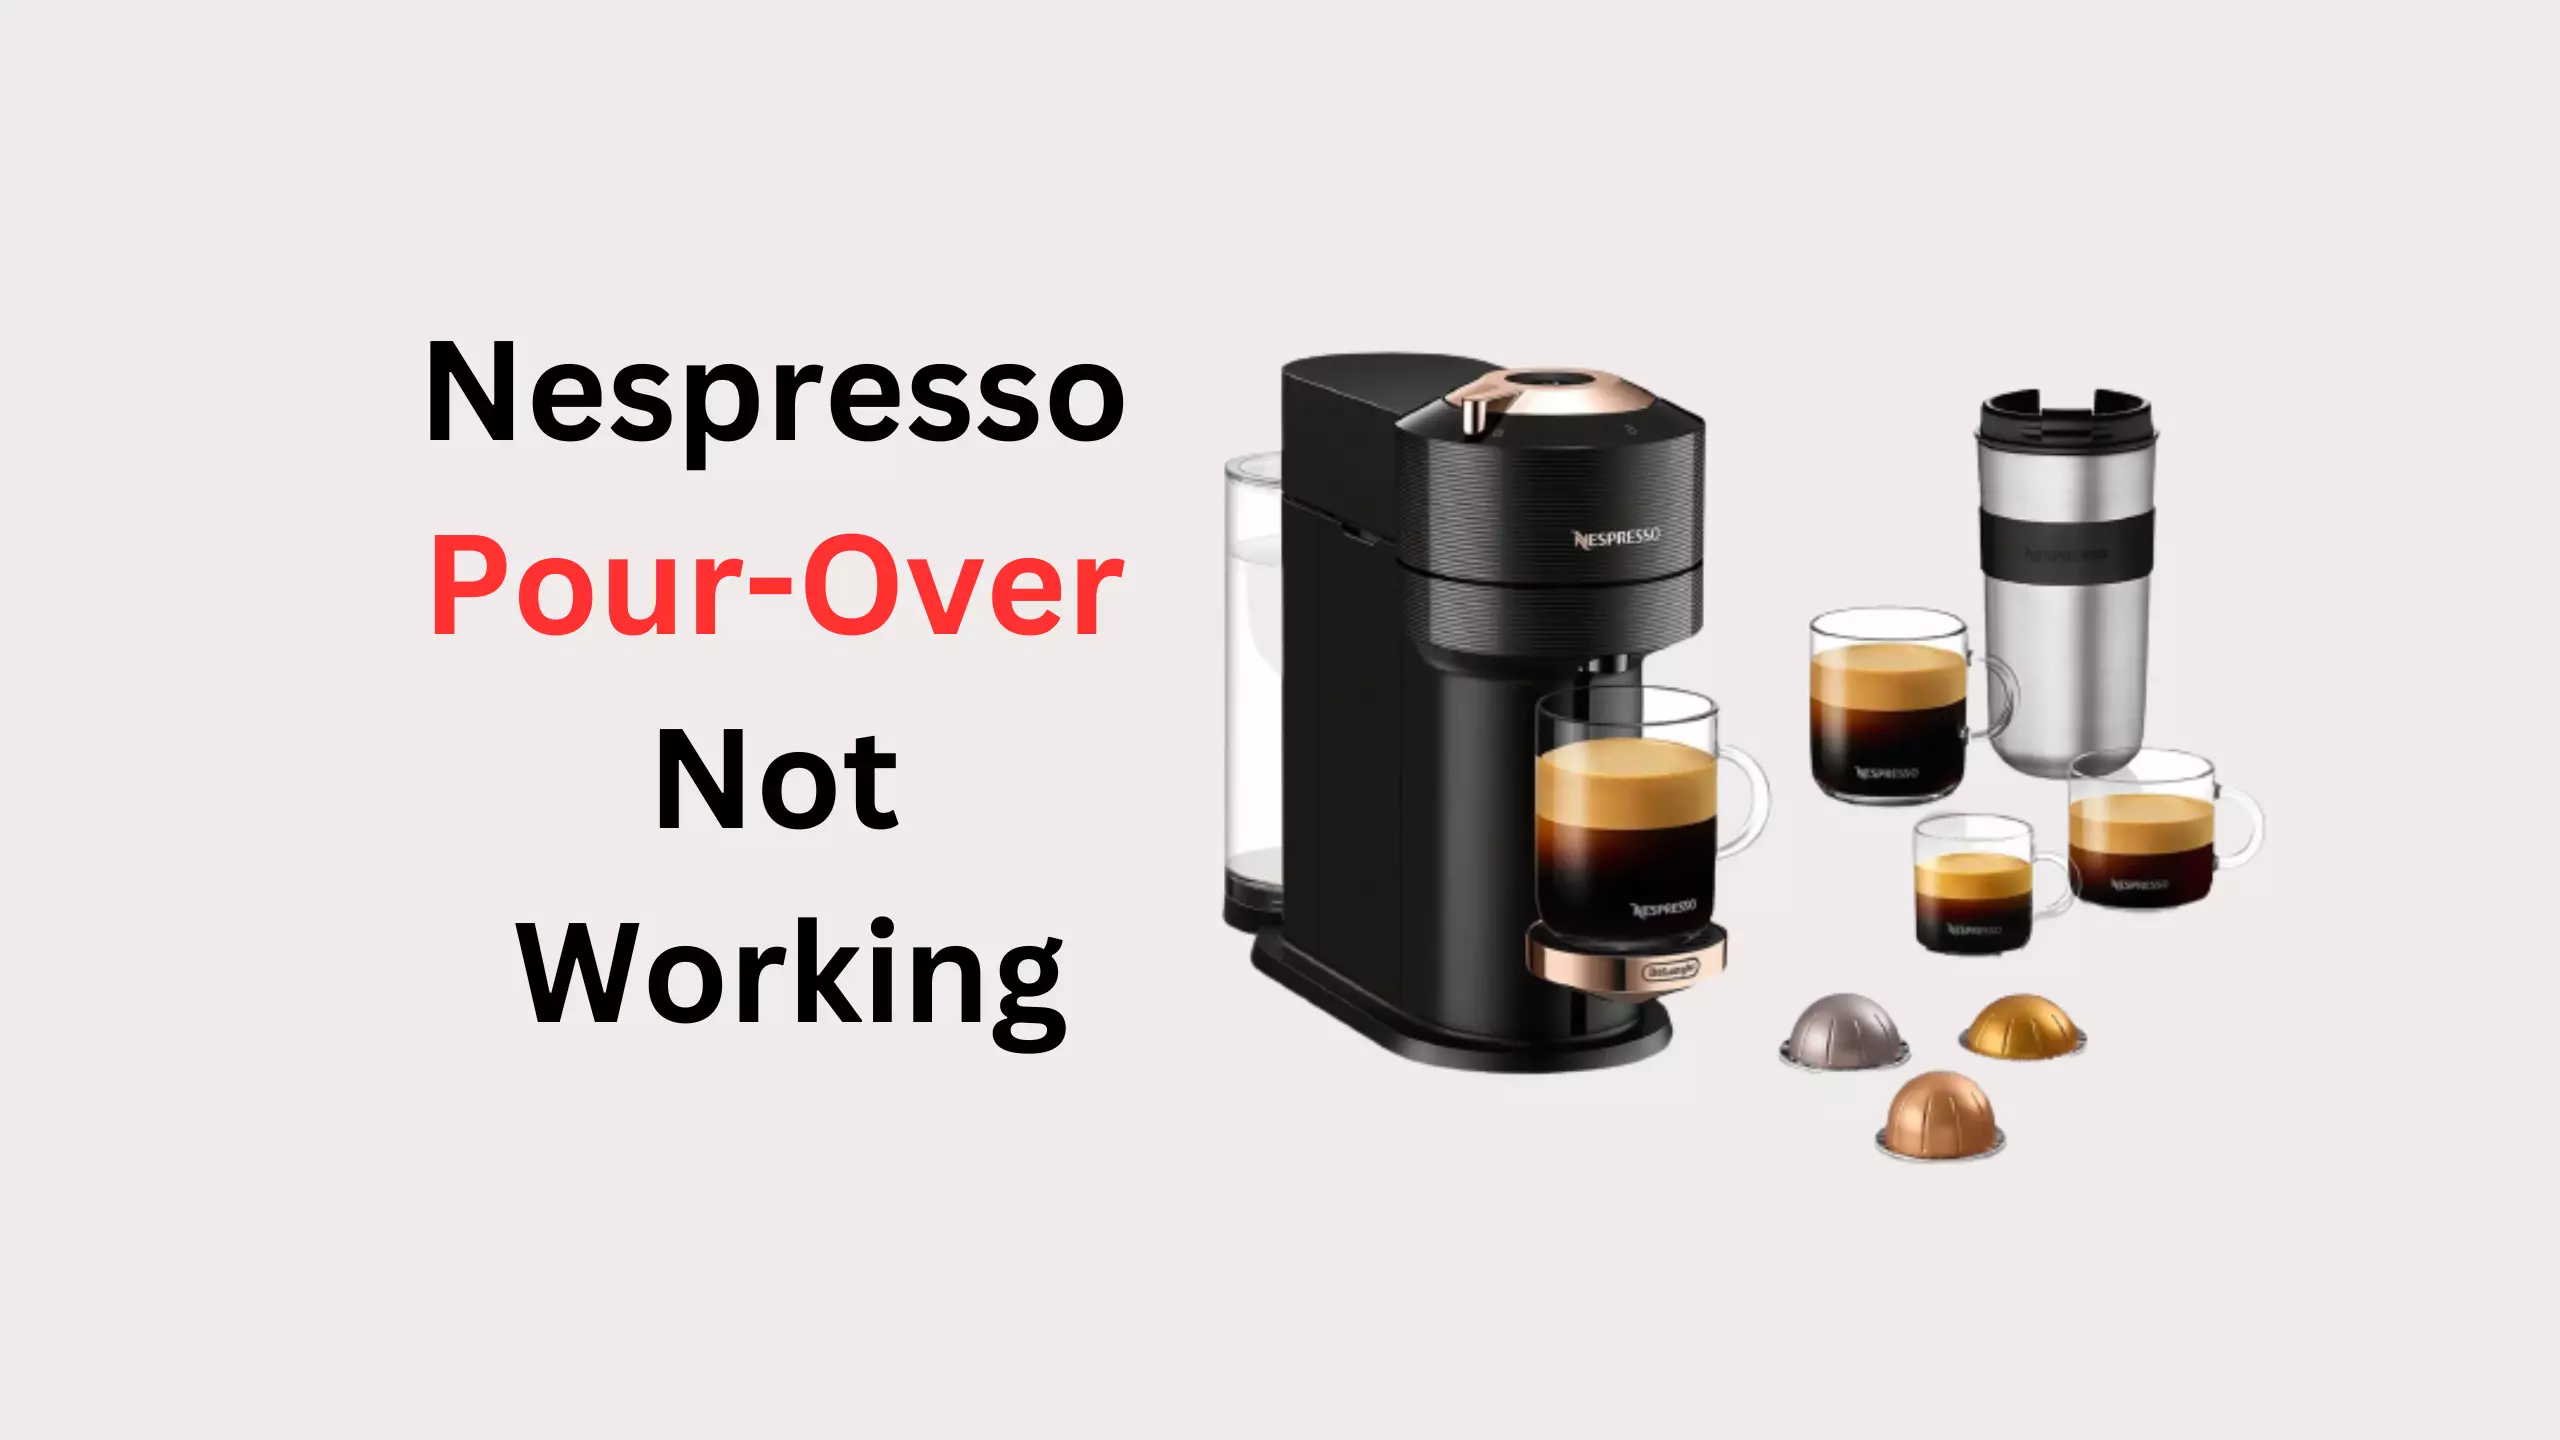 nespresso pour-over Not Working